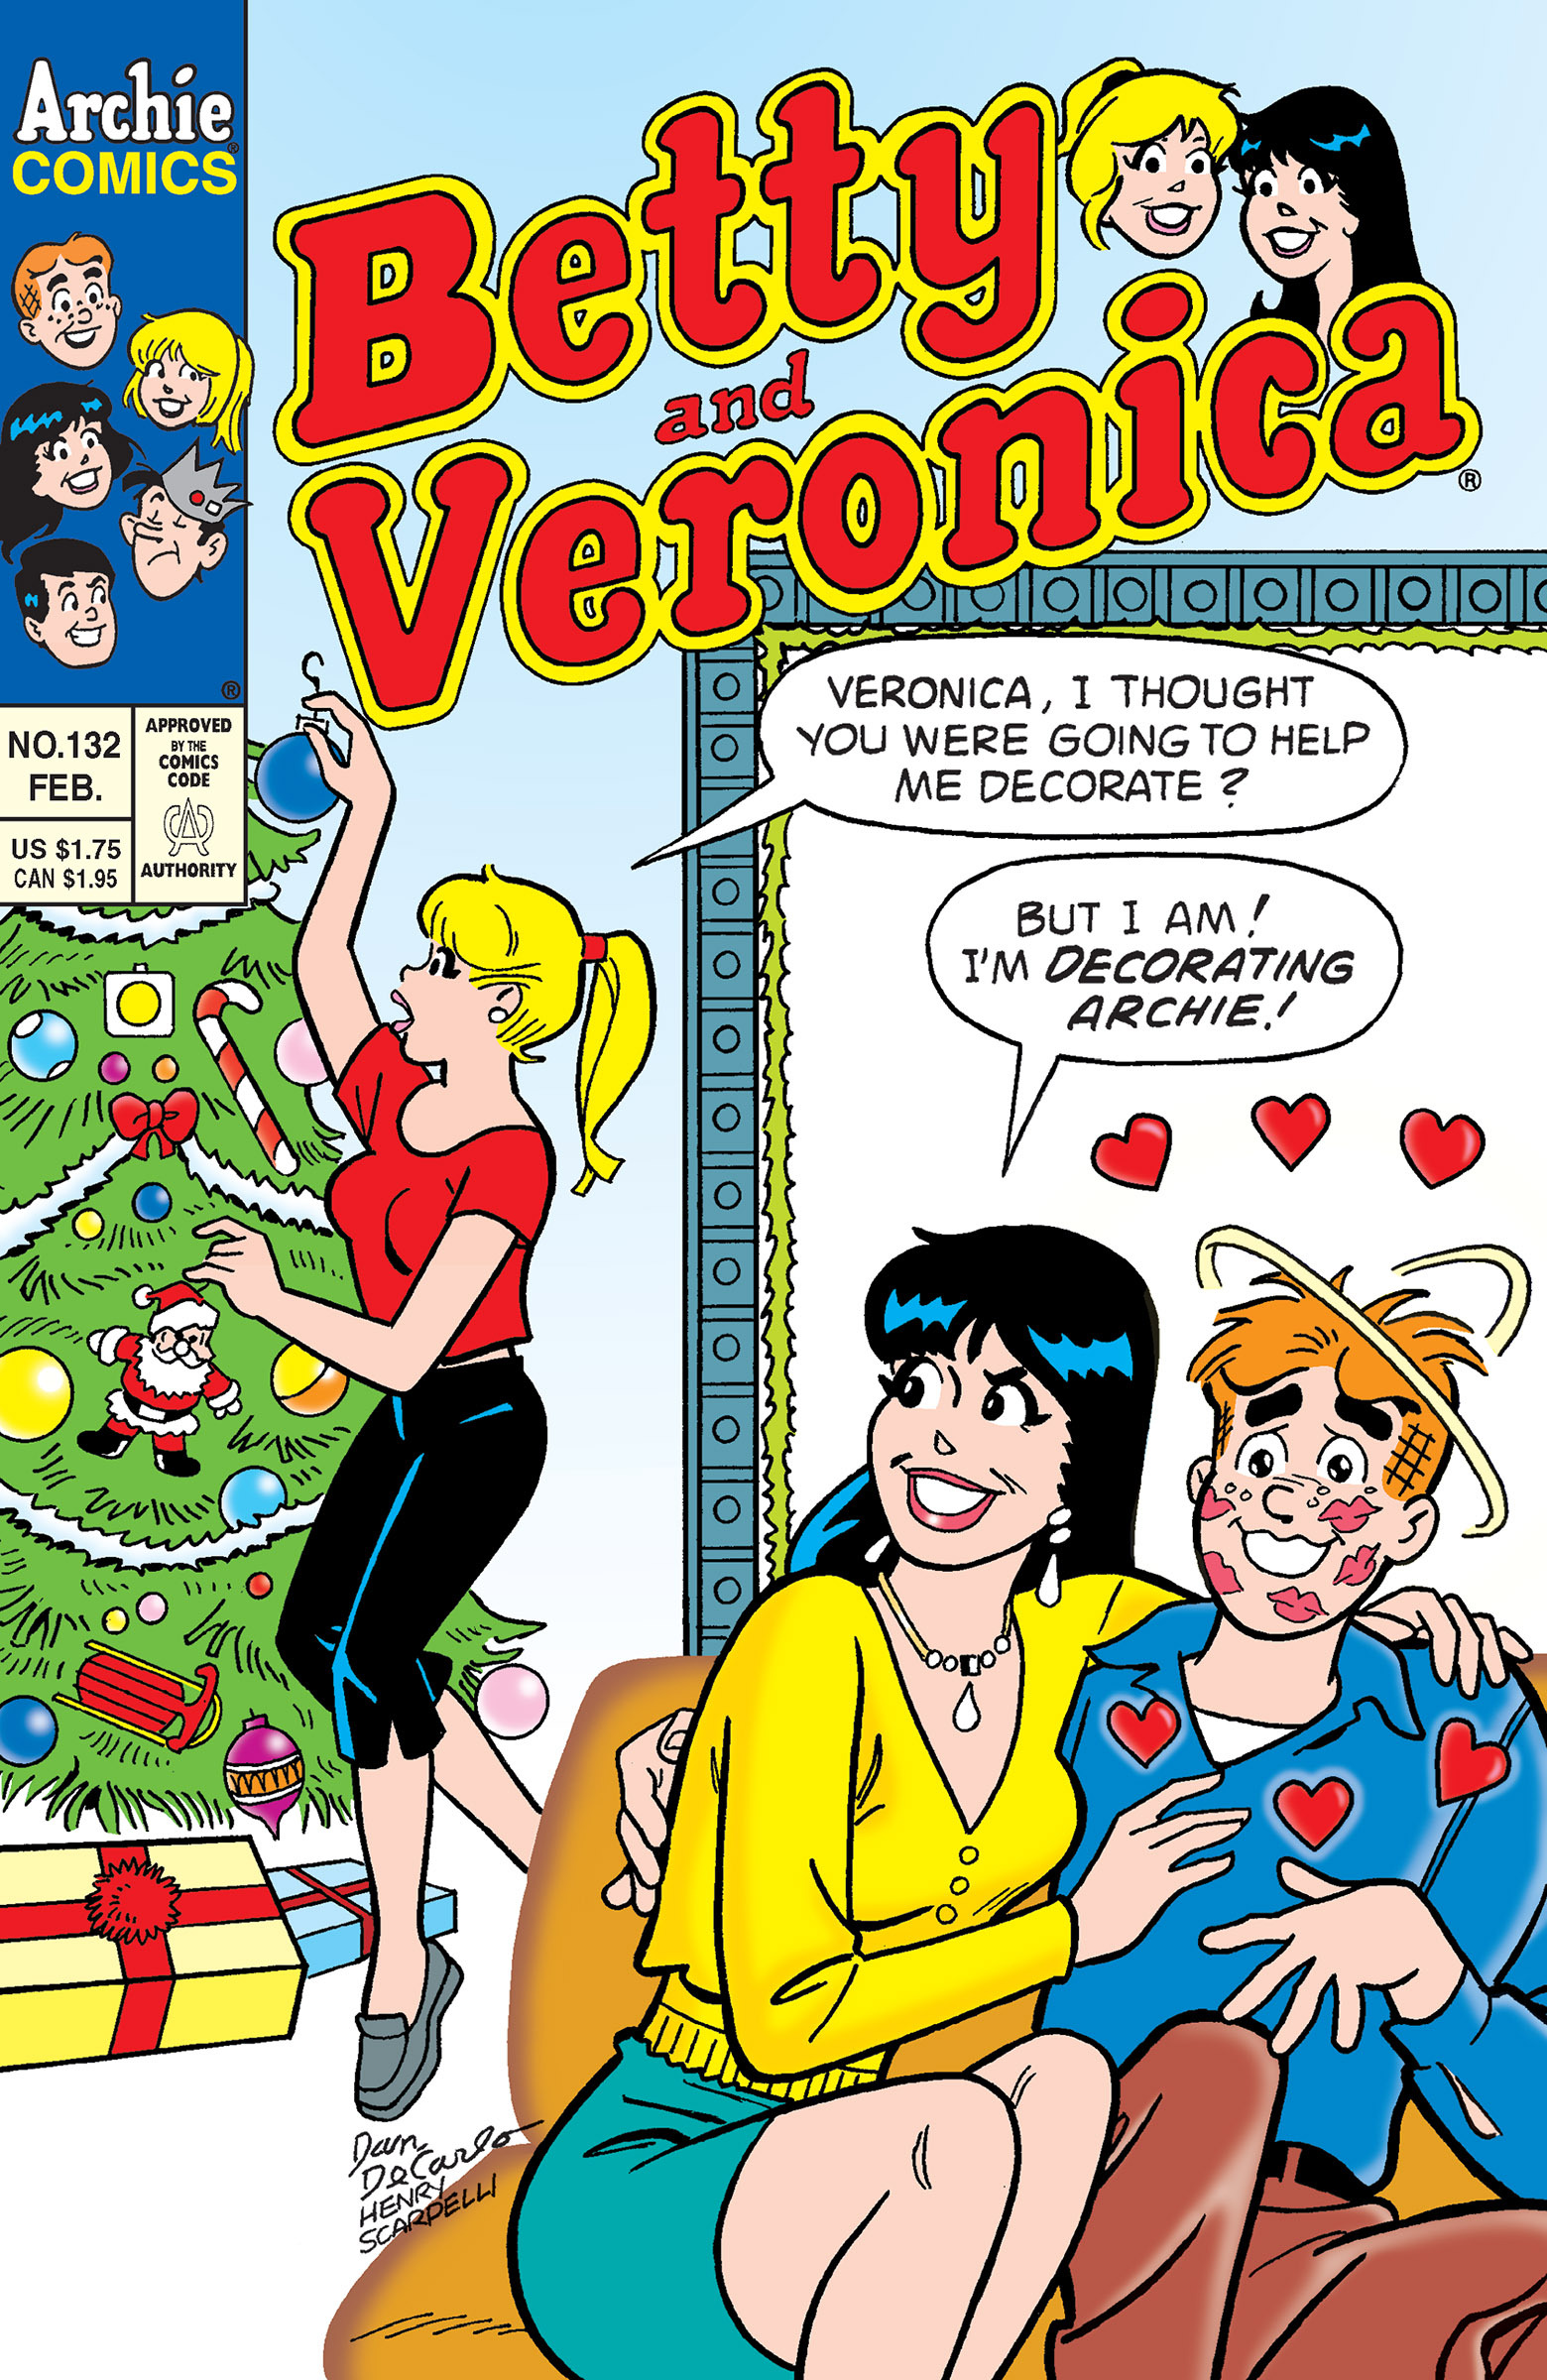 Betty is decorating a Christmas tree and complains that Veronica isn't helping her. Veronica says she's decorating Archie, who is covered in lipstick marks.